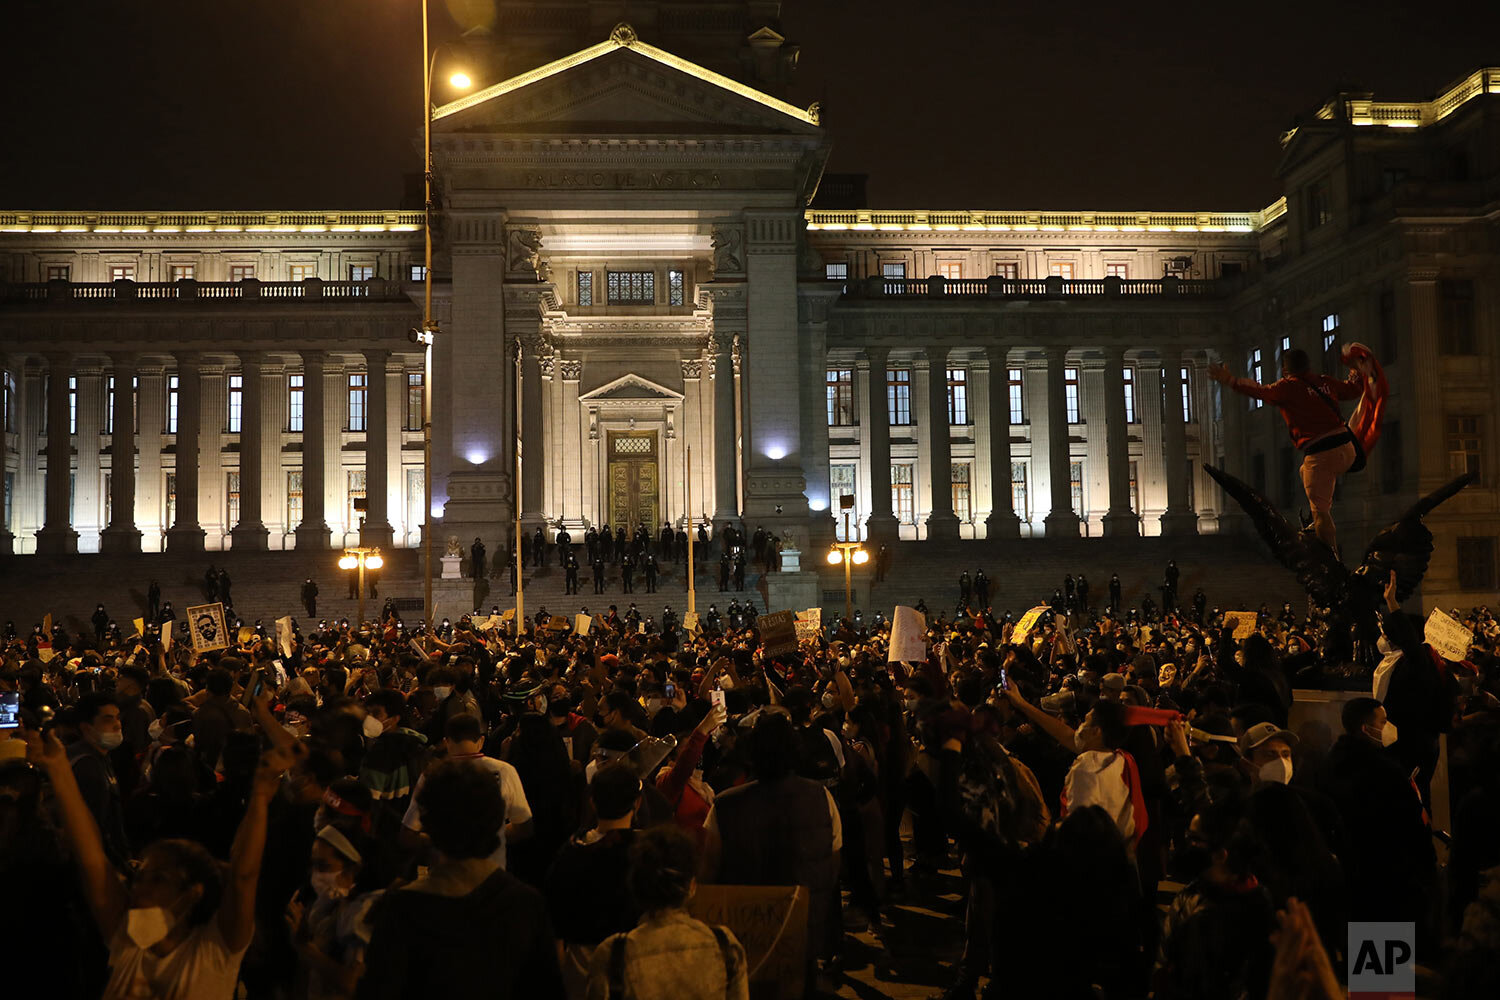  Protesters against the removal of President Martin Vizcarra gather outside the Justice Palace, in Lima, Peru, Thursday, Nov. 12, 2020.  (AP Photo/Rodrigo Abd) 